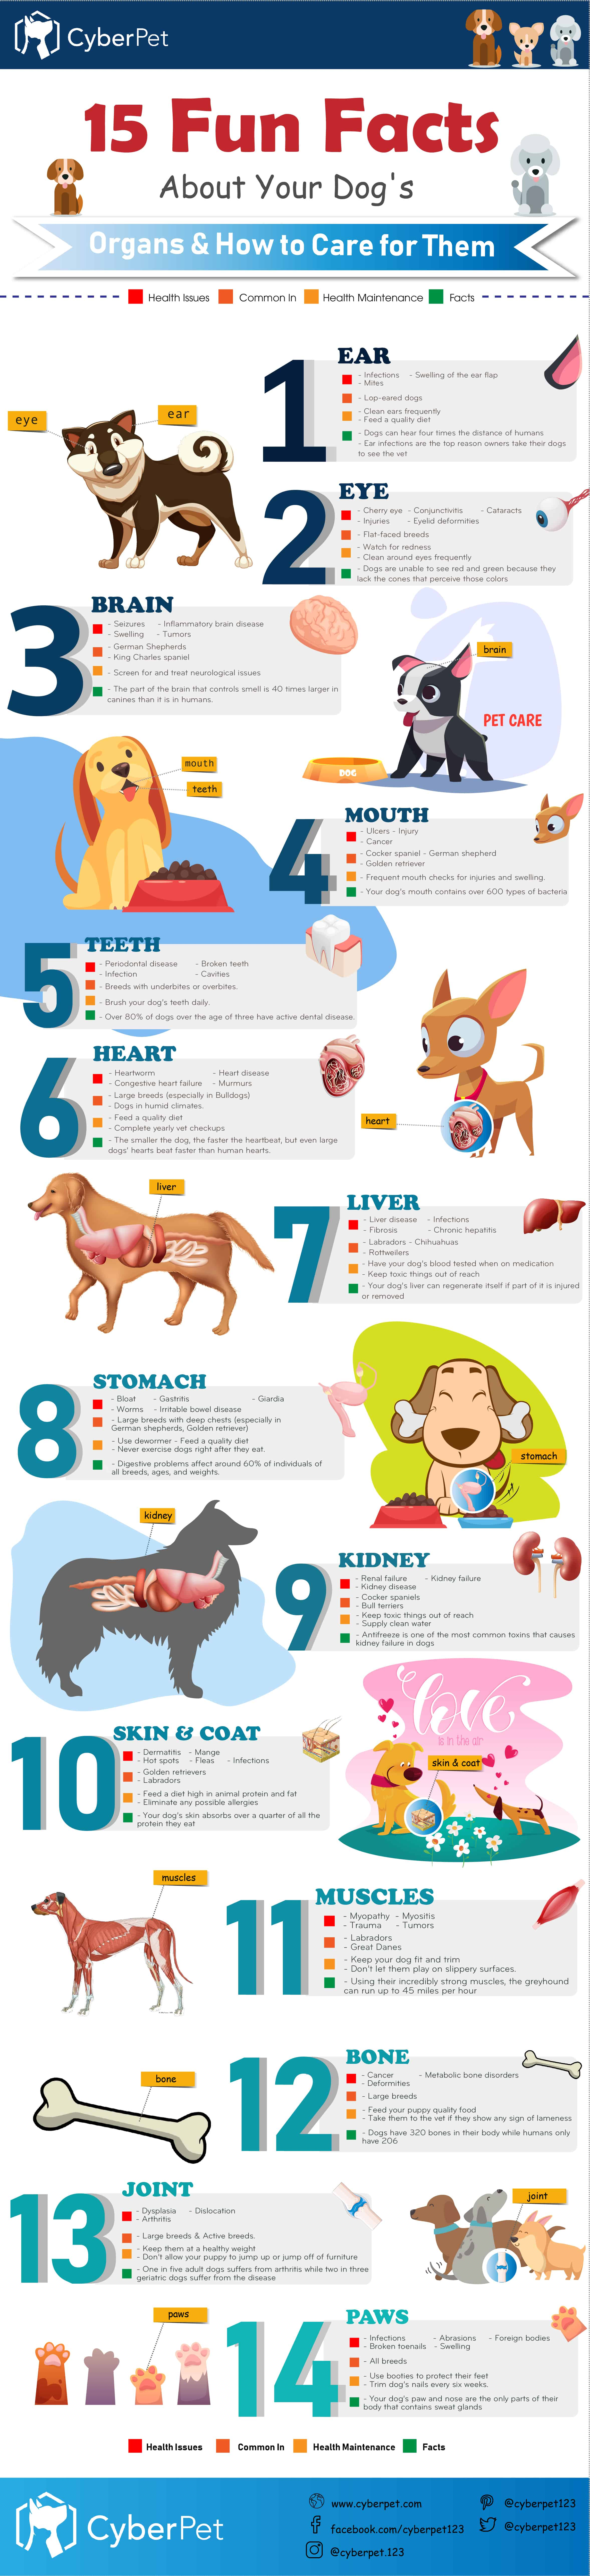 15 Fun Facts About Your Dog Organs and How to Care for Them